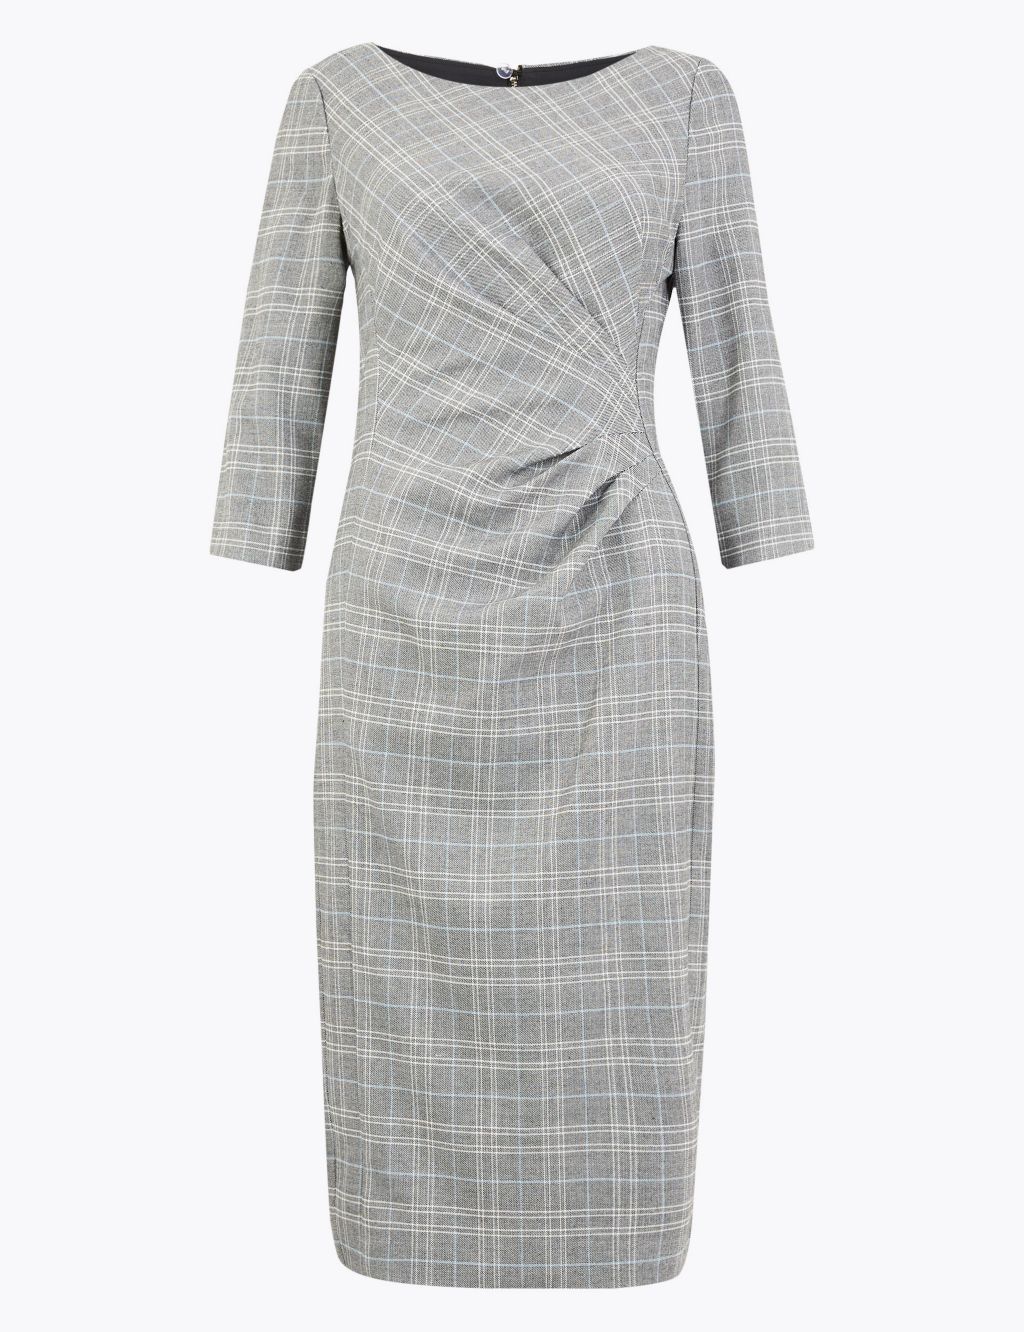 Checked Tailored Dress | M&S Collection | M&S